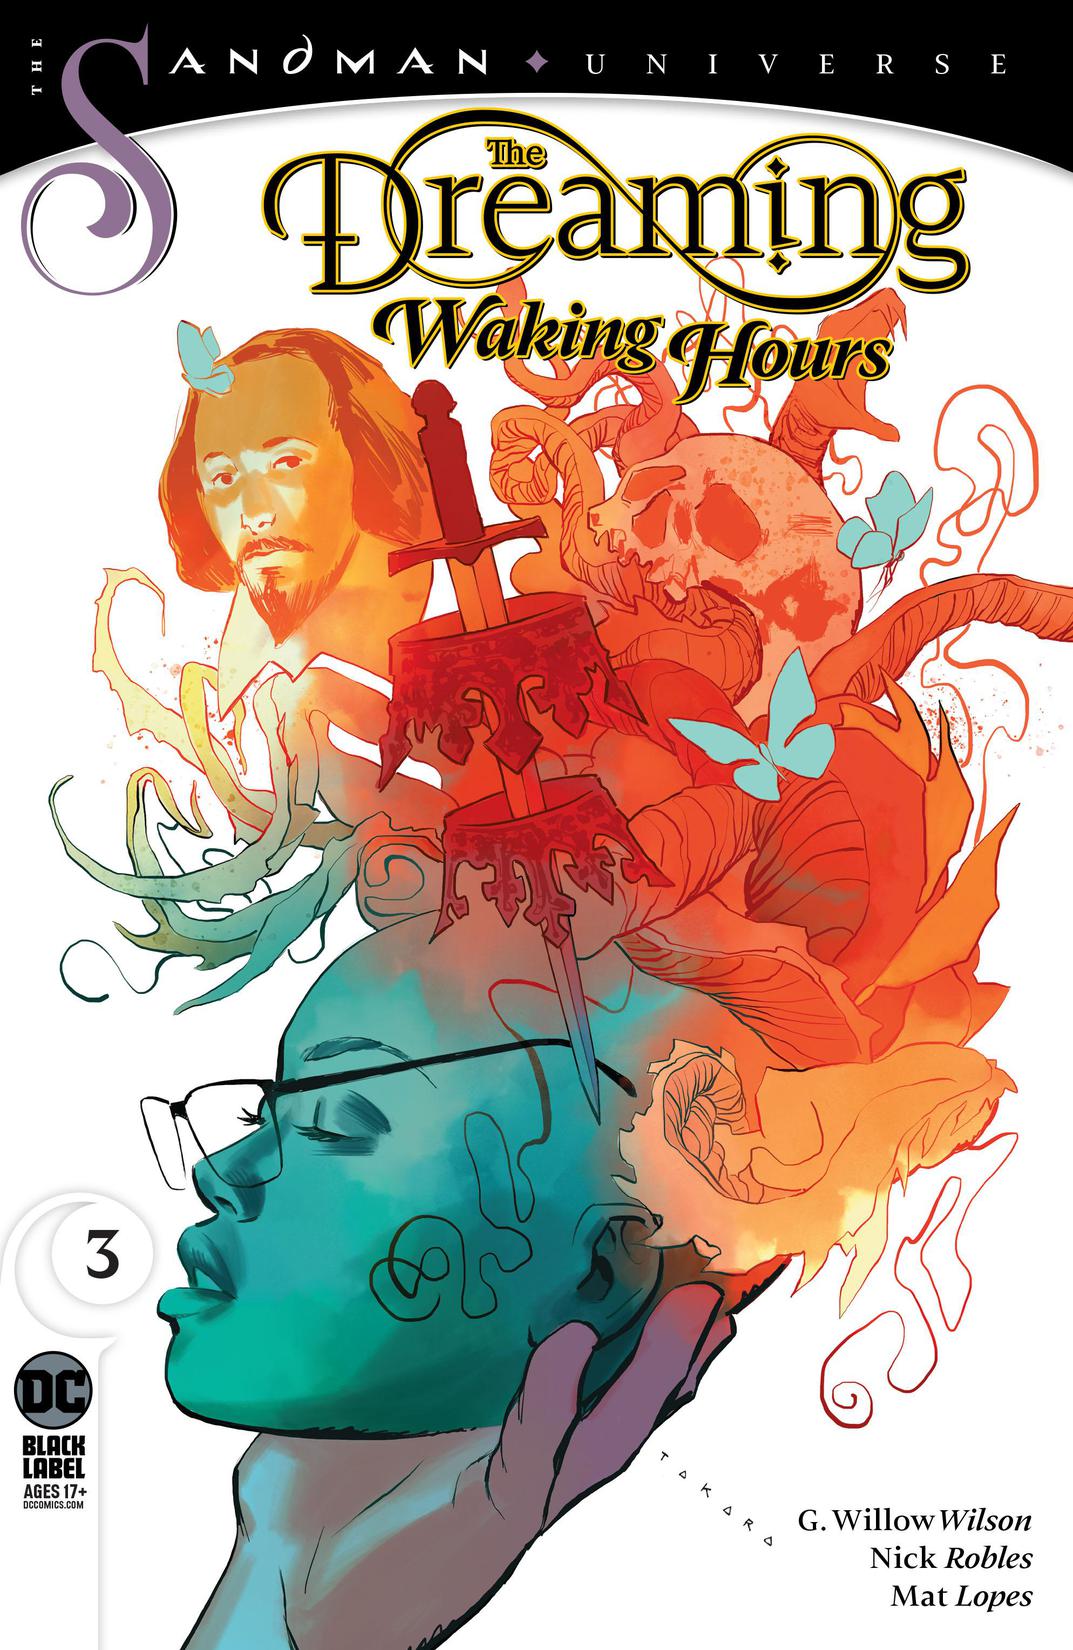 The Dreaming: Waking Hours #3 preview images